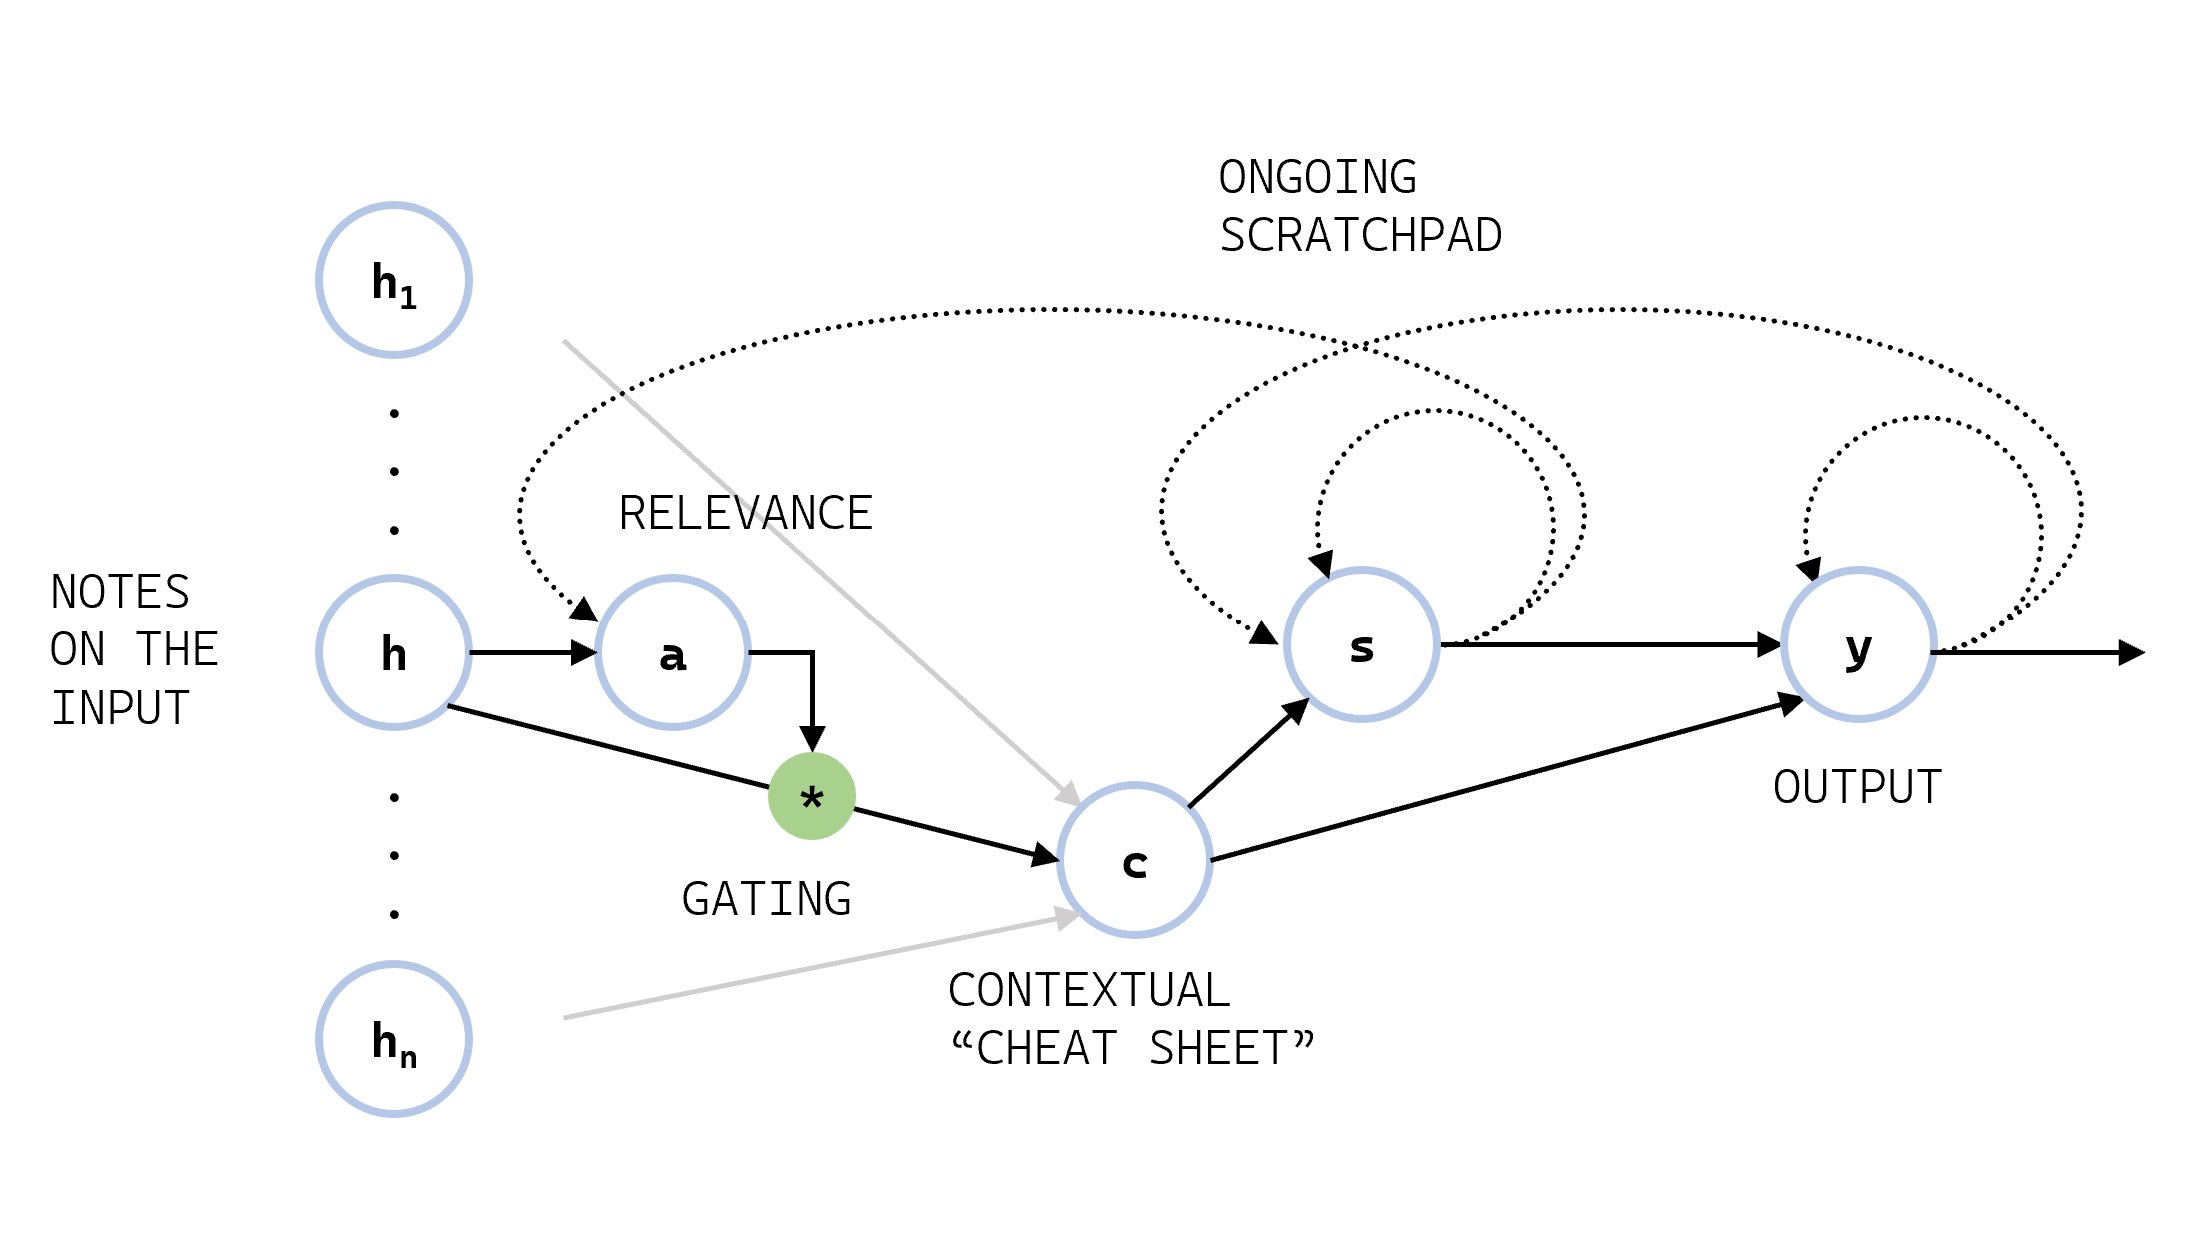 A diagram explaining the relationship between the pieces of the attention algorithm.